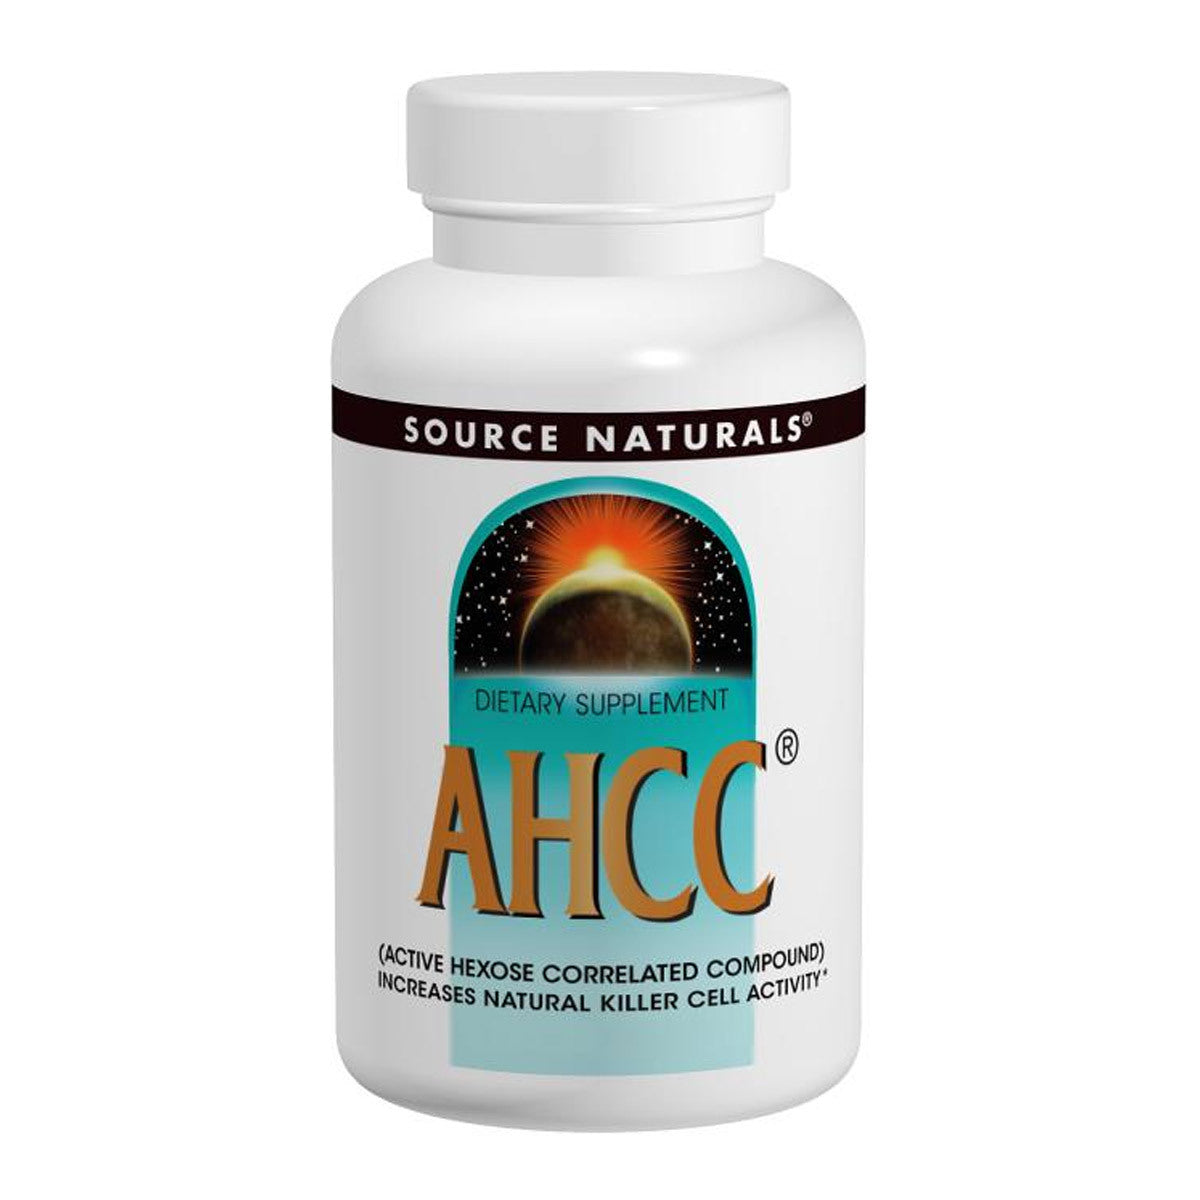 Primary image of AHCC 500mg